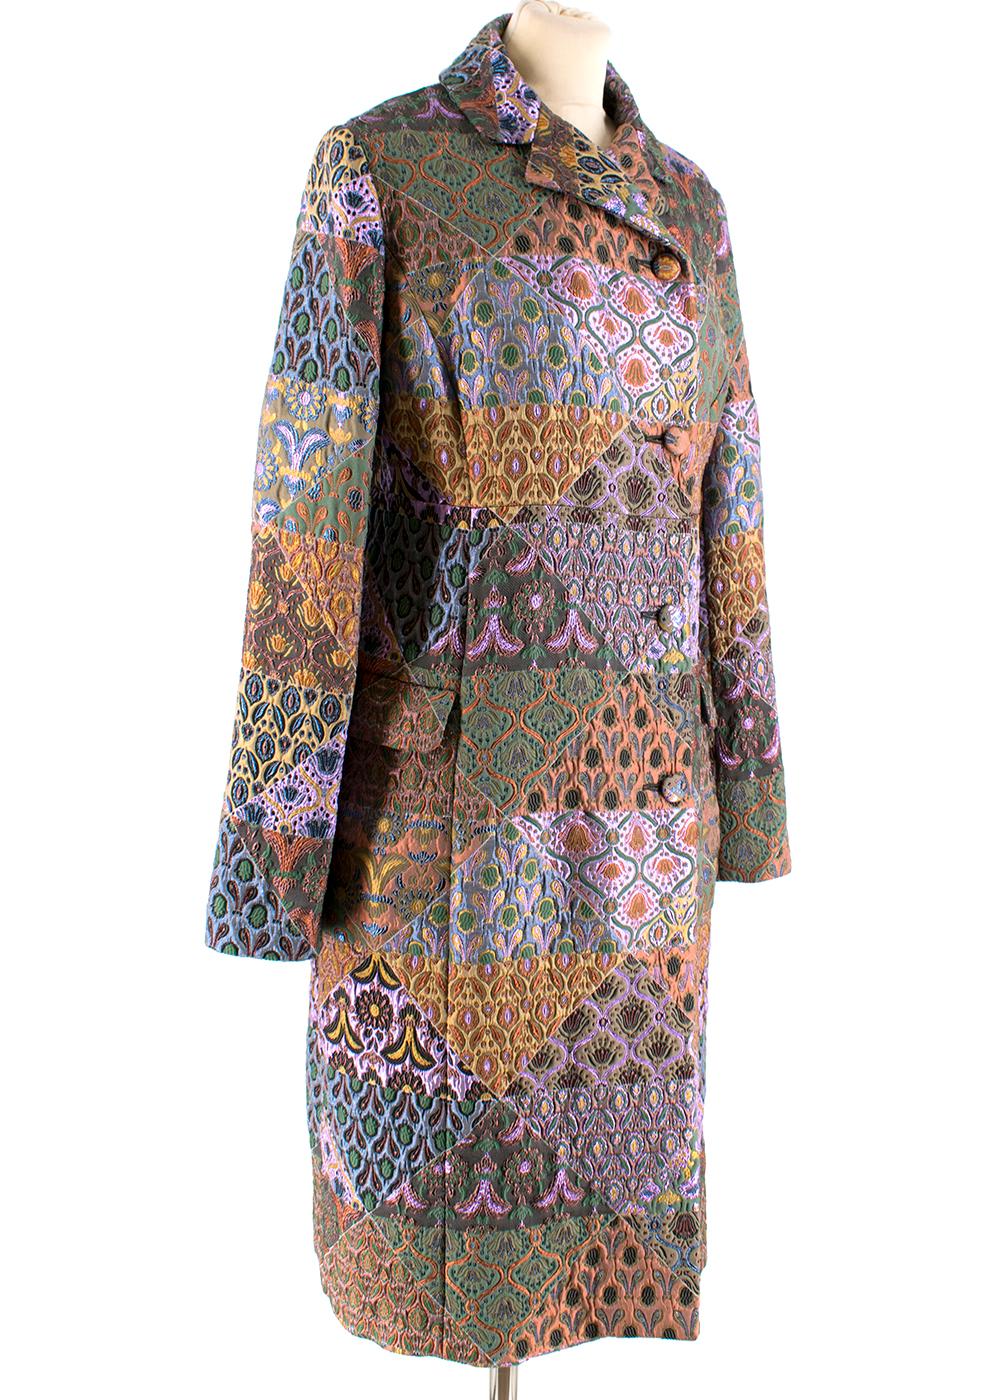 Miu Miu Metalic Abstract Pattern Jaquard Coat 

- Single Breasted  

- Notched Collar and Flap Pockets 

- Button Closure Down Front

- Made in Italy 
